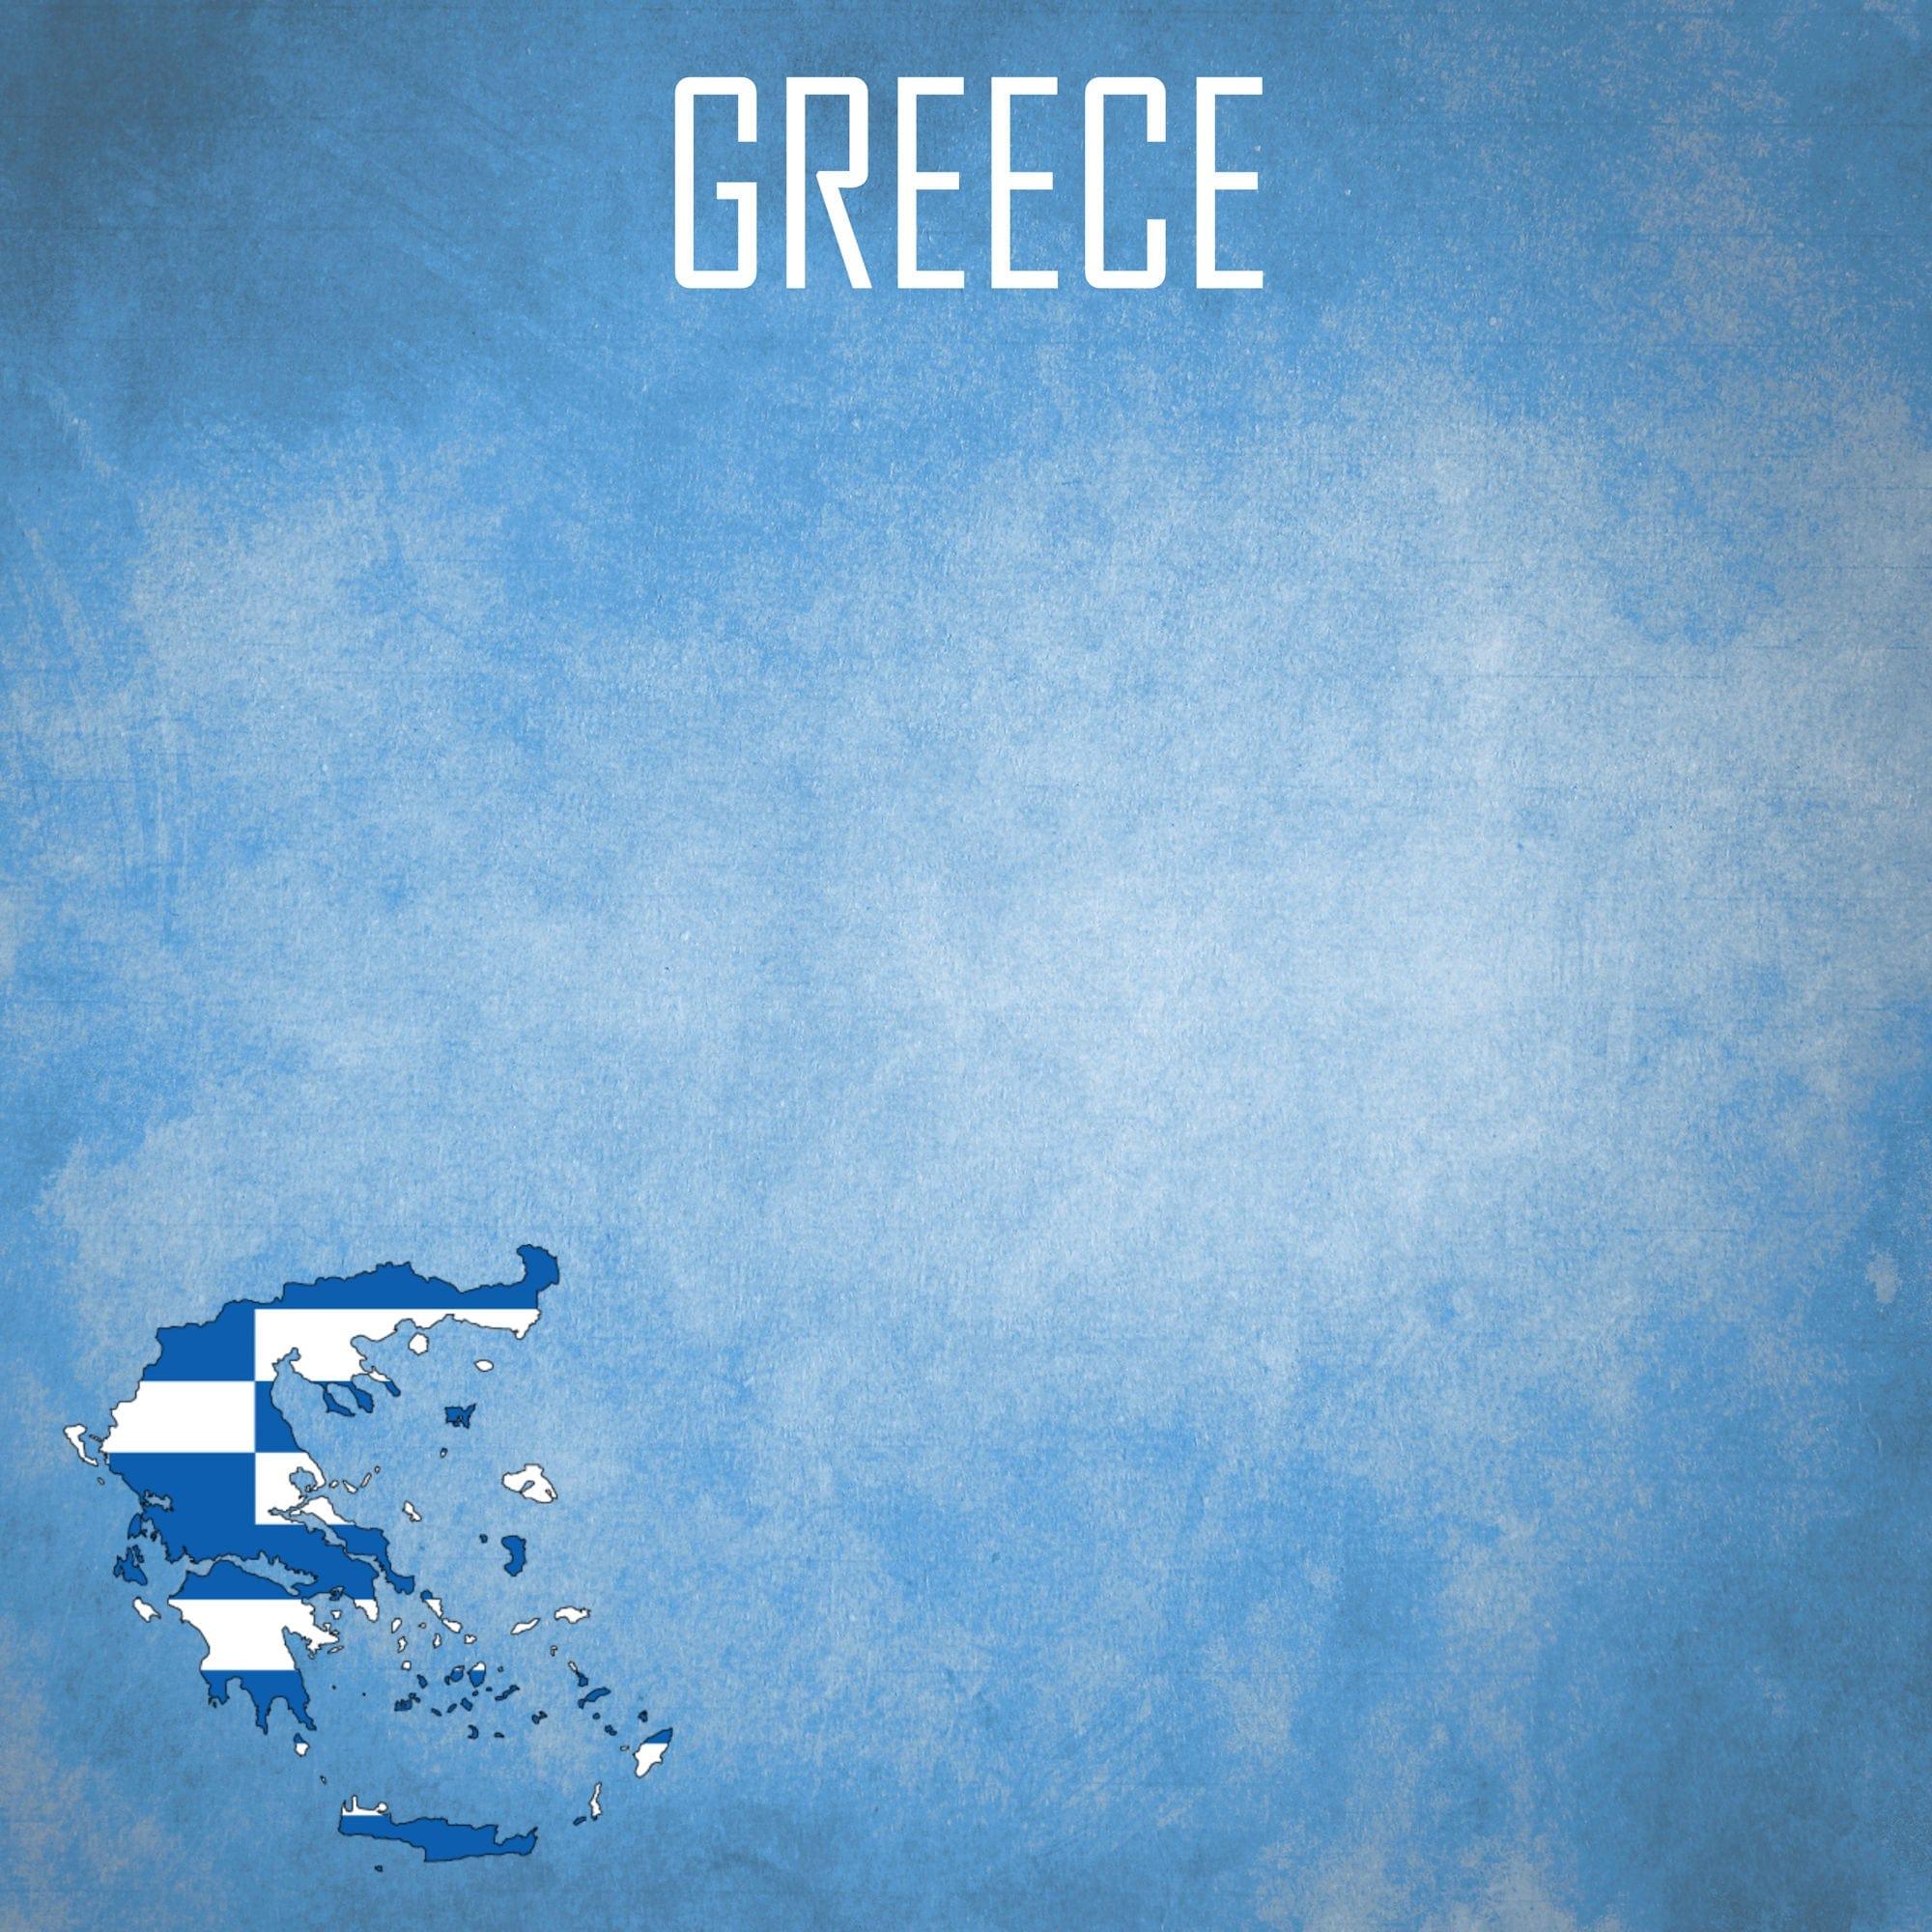 Greece Collection Flag of Greece 12 x 12 Double-Sided Scrapbook Paper by SSC Designs - Scrapbook Supply Companies